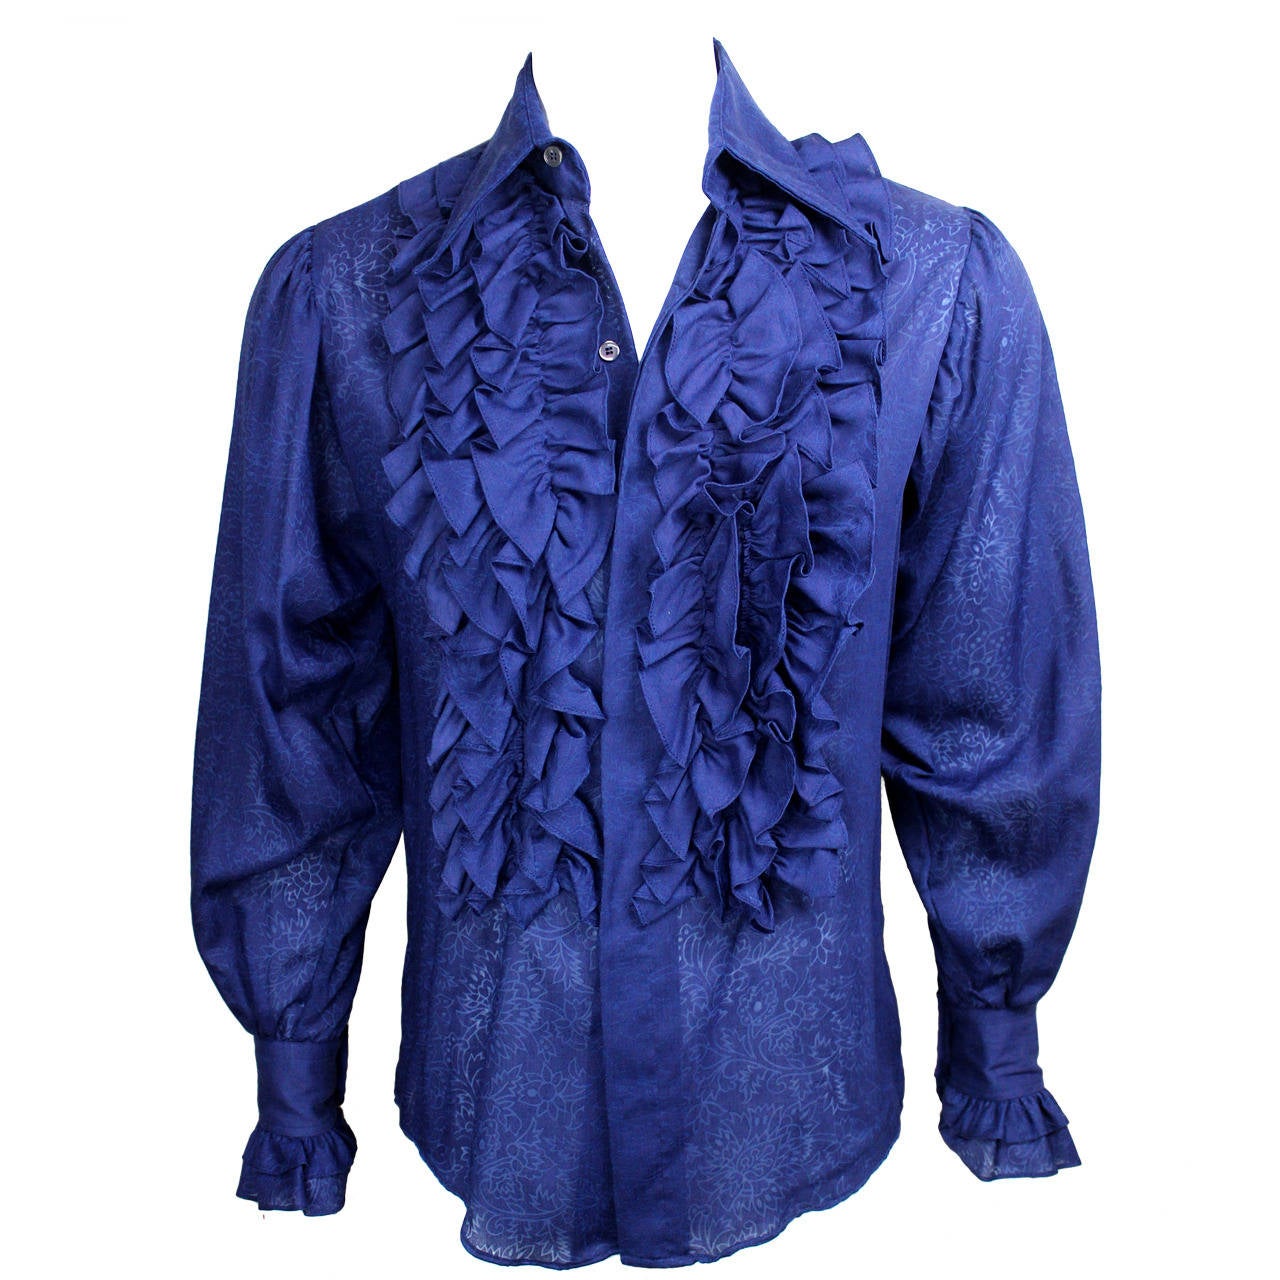 1960s Village Squire Men's Sheer Etched Ruffle Shirt